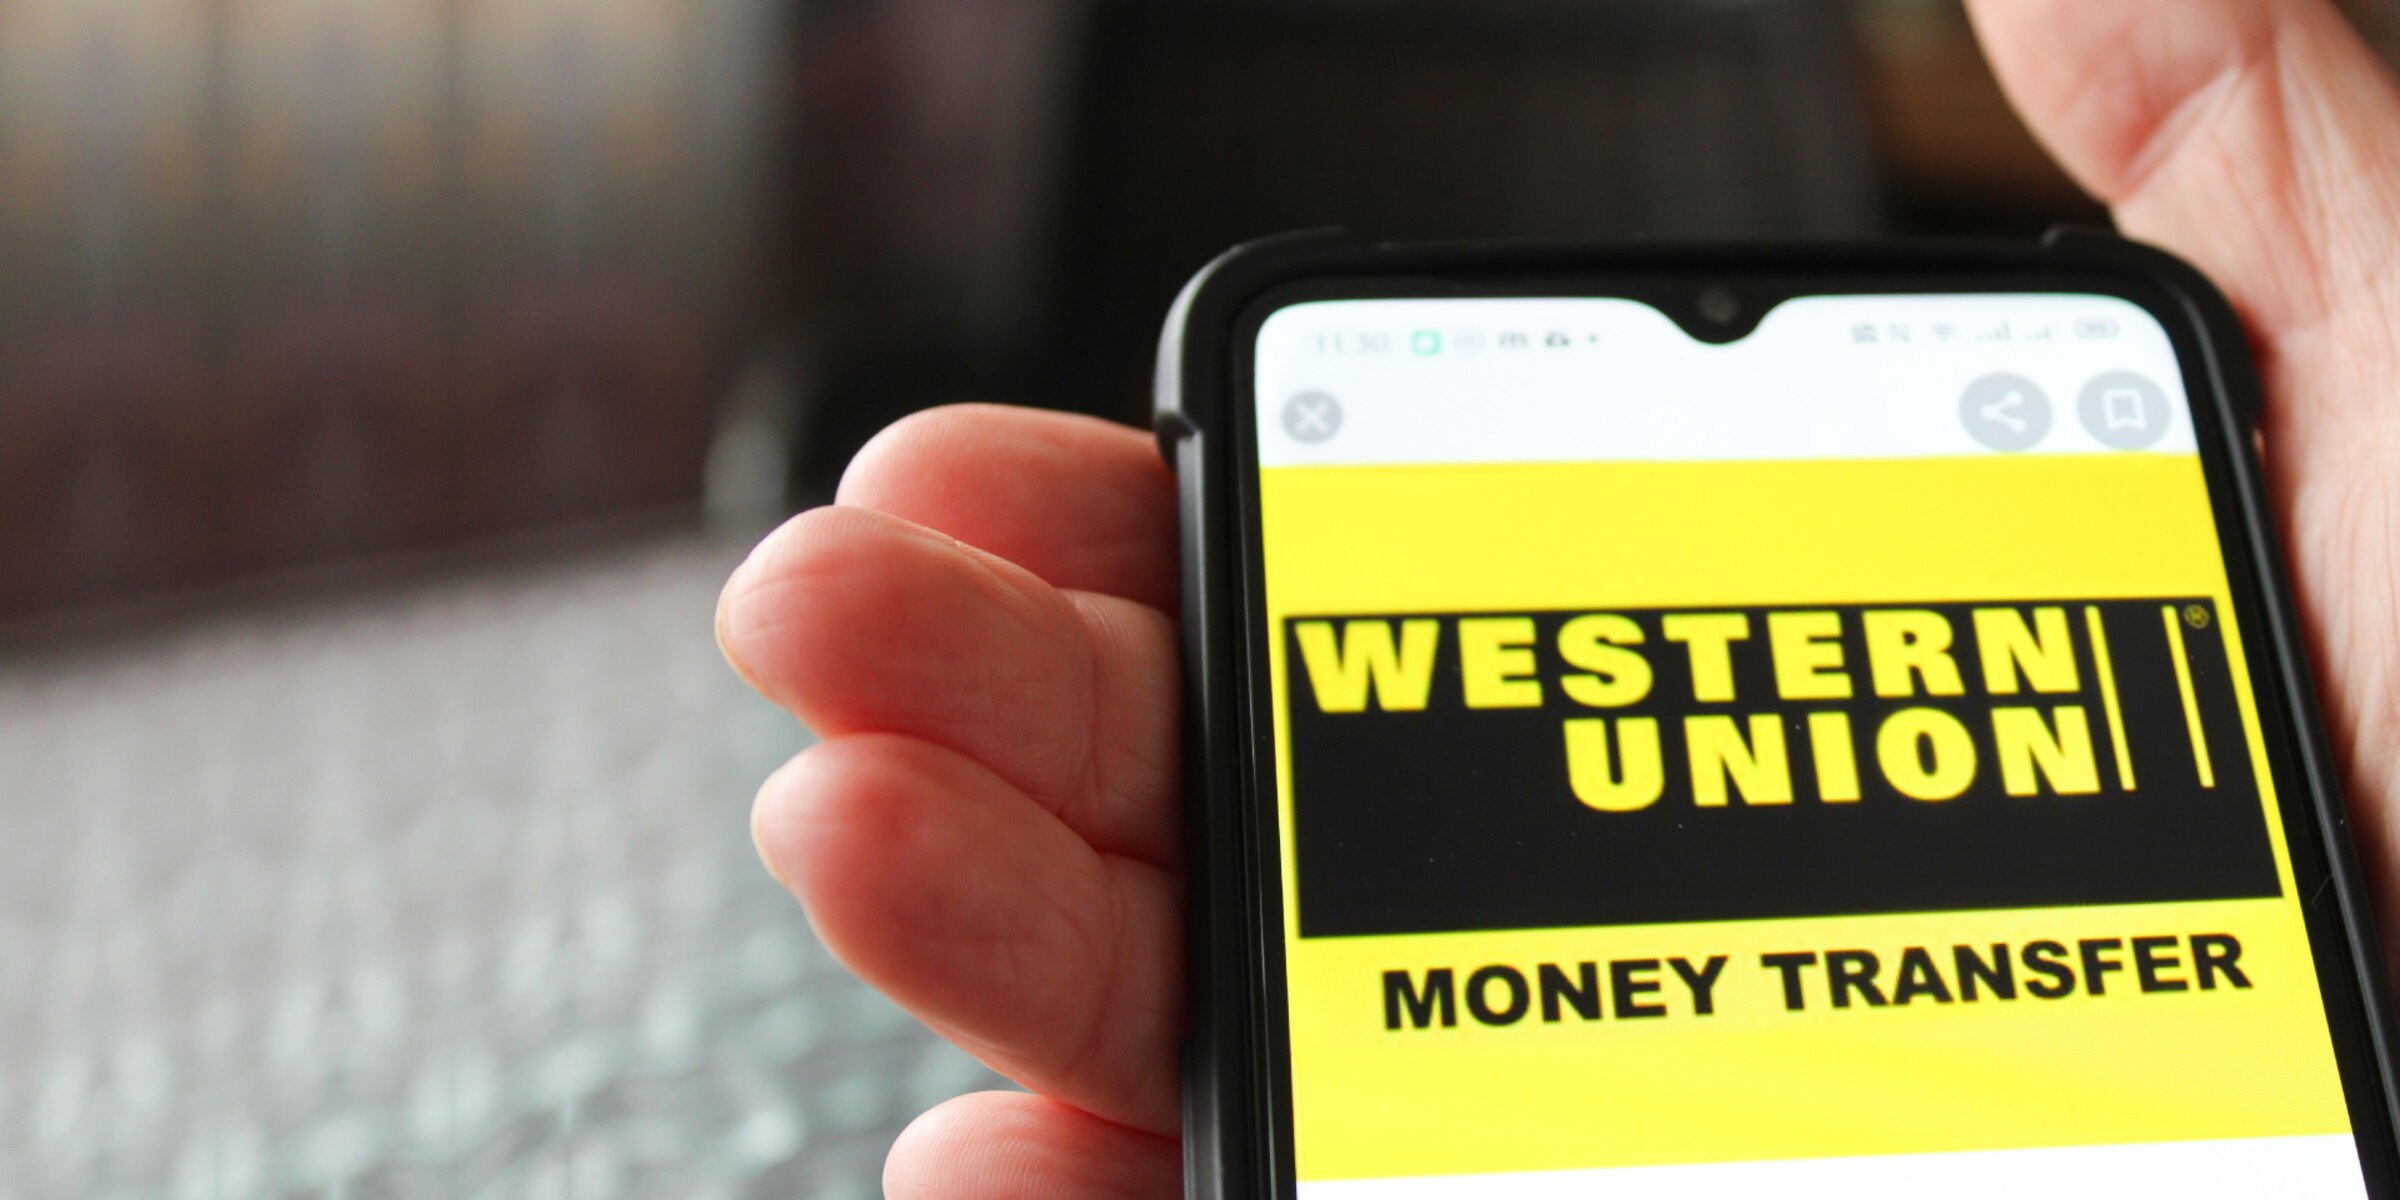 How To Money Transfer With Western Union